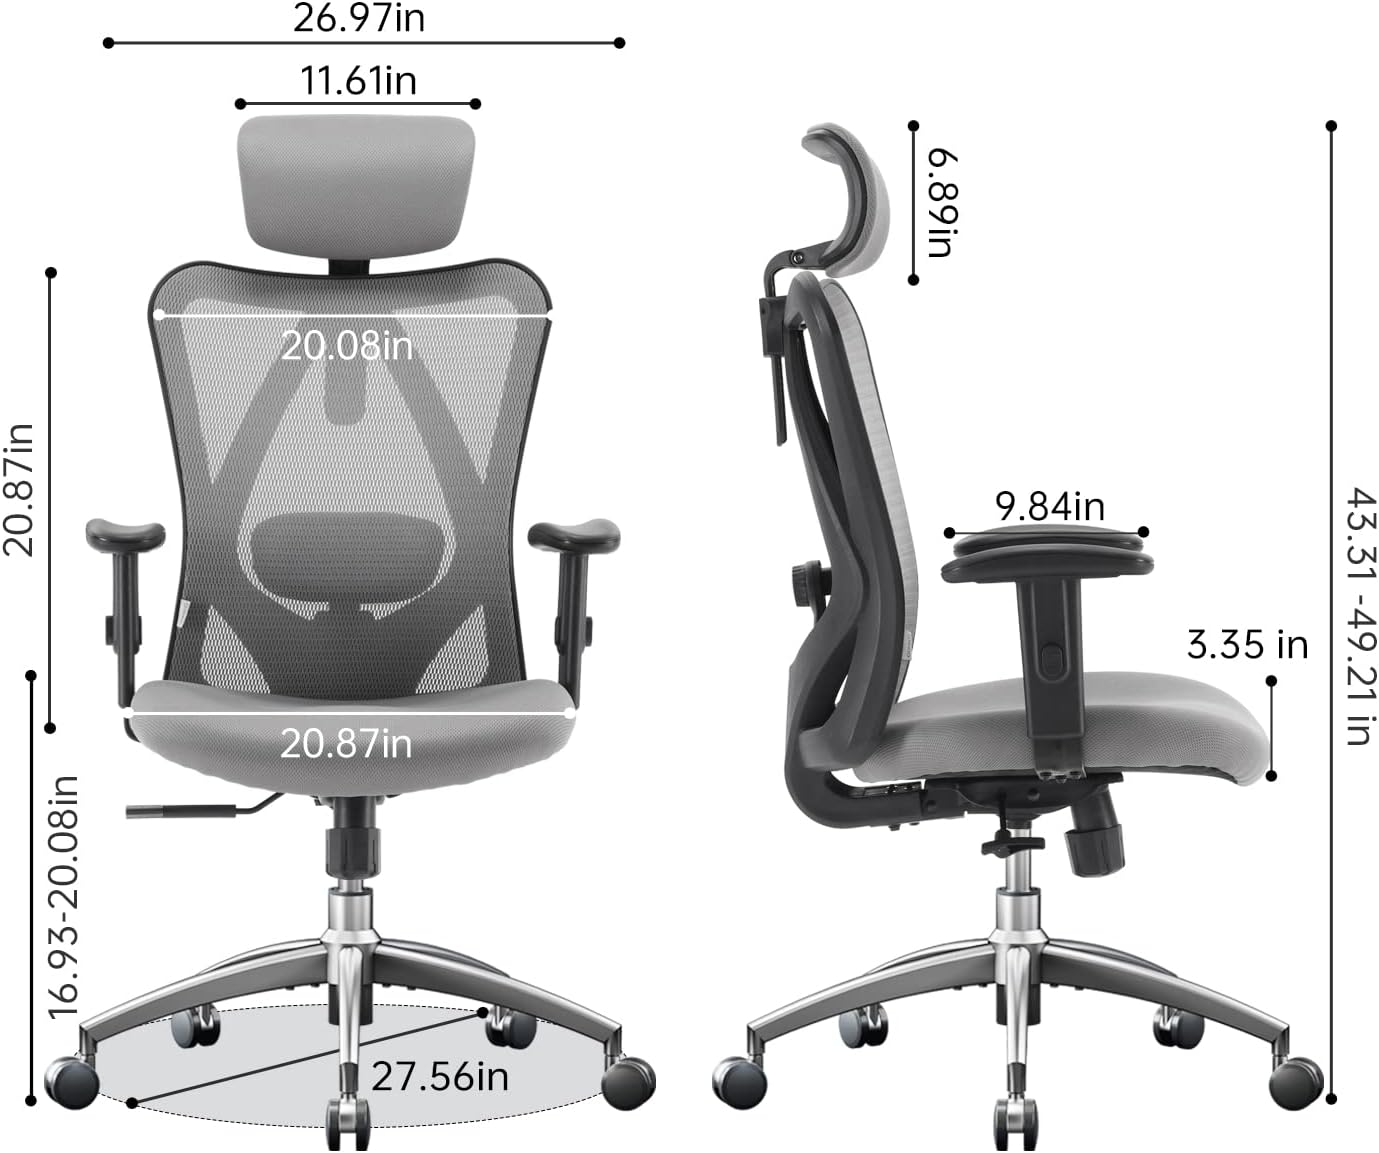 SIHOO M18 Ergonomic Office Chair, Computer Desk Chair with Adjustable  Headrest and Lumbar Support, High Back Executive Swivel Chair for Home  Office